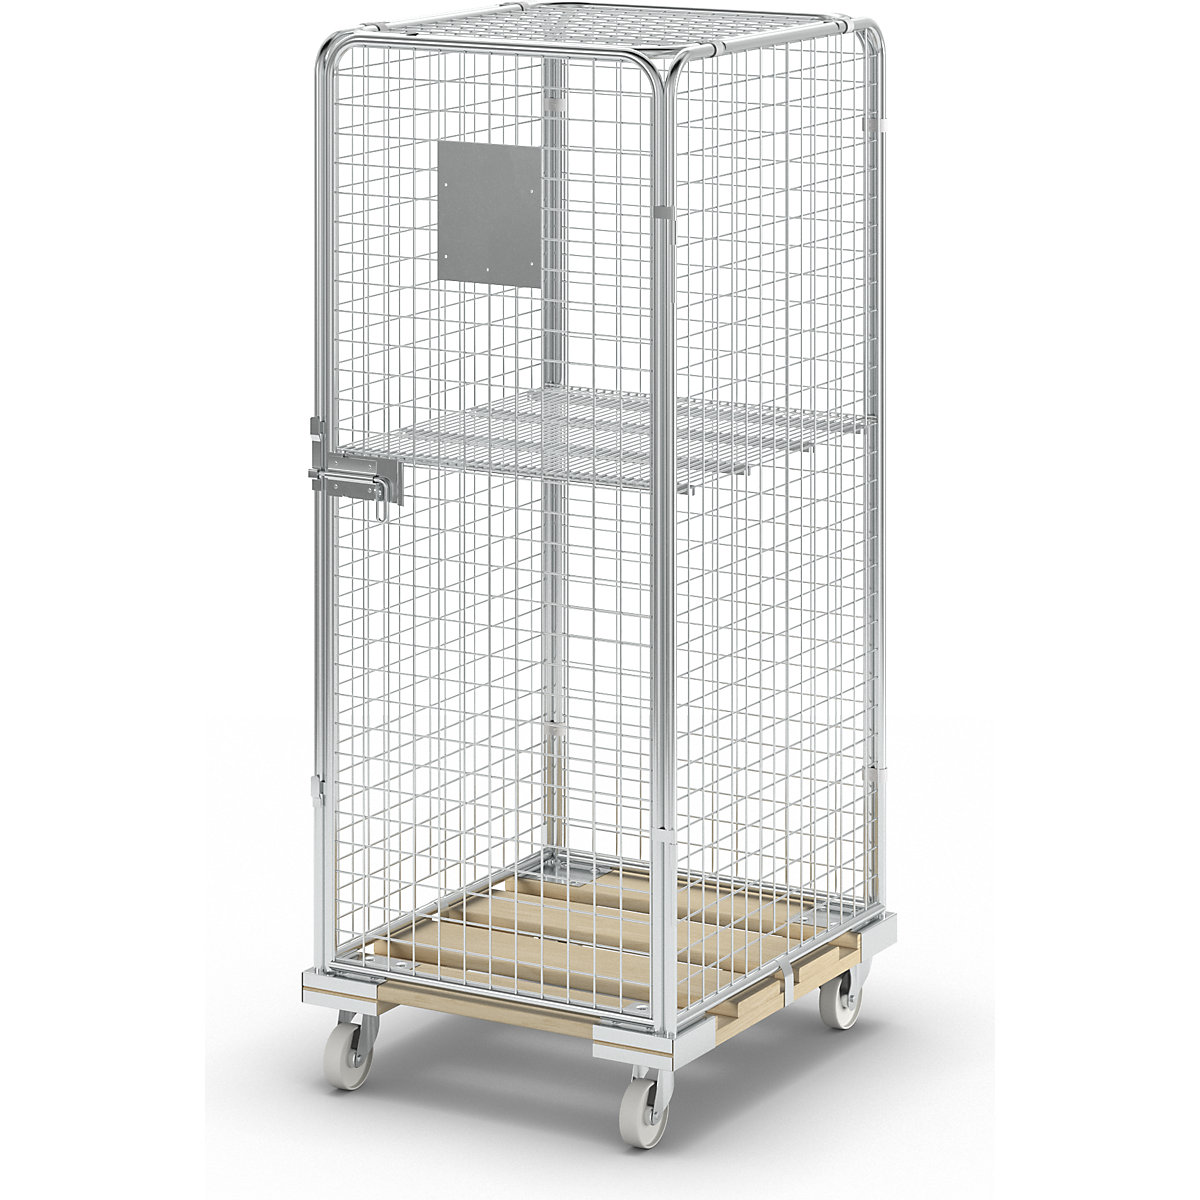 Security roll container with wooden dolly, effective height 1585 mm, with 1 door, 1 wire mesh intermediate shelf-1